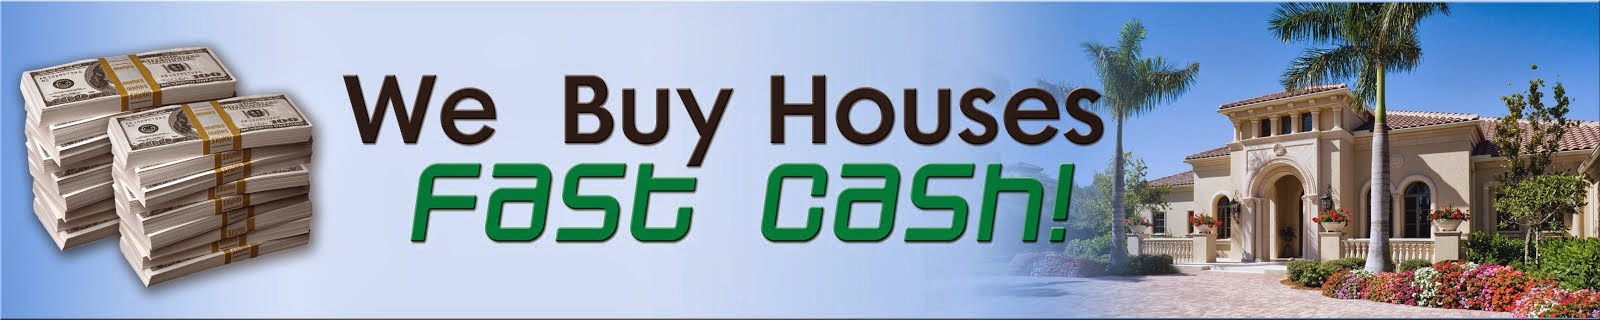 Sell Your House Fast for Cash | Property Buyers Birmingham, UK